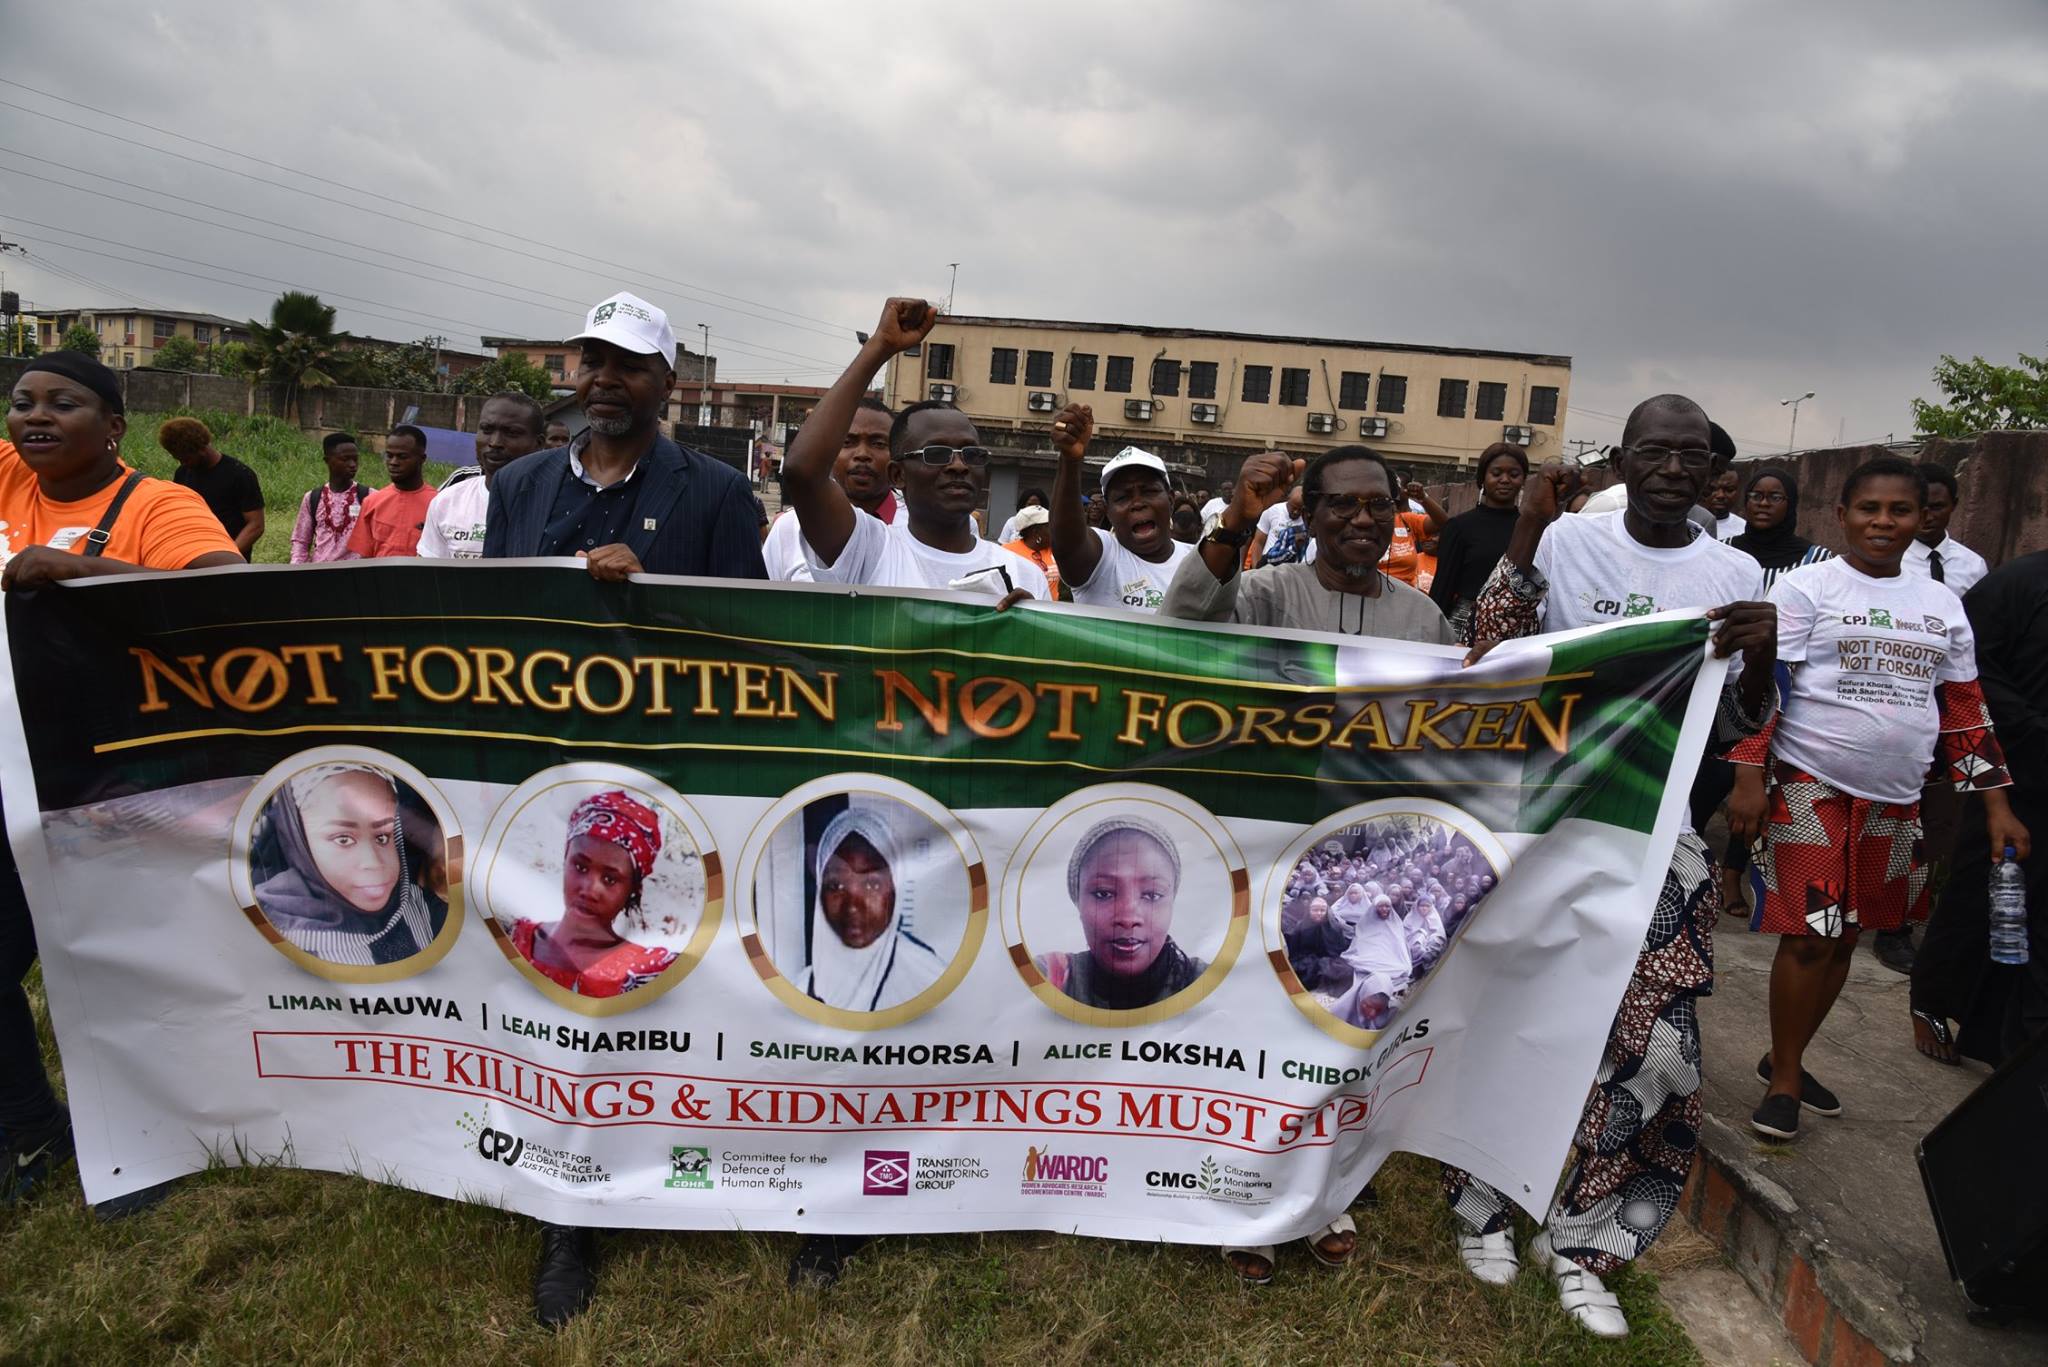 A protest in Nigeria against the abduction of Christian girls (Credit: Catalyst for Global Peace and Justice)